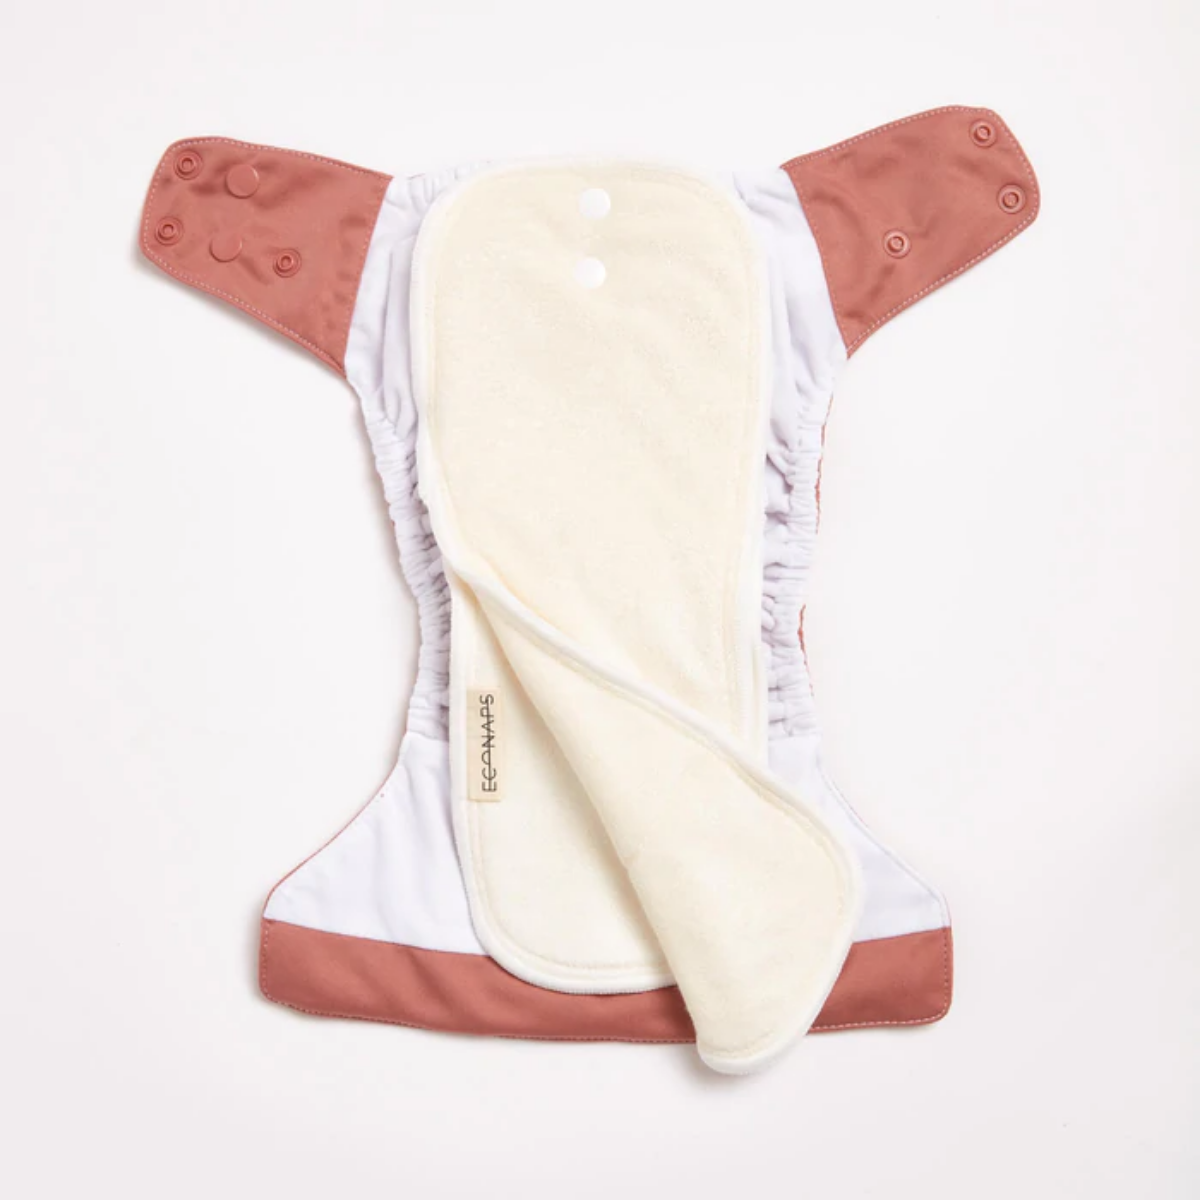 An open Terracotta 2.0 Modern Cloth Nappy by EcoNaps on a white surface.